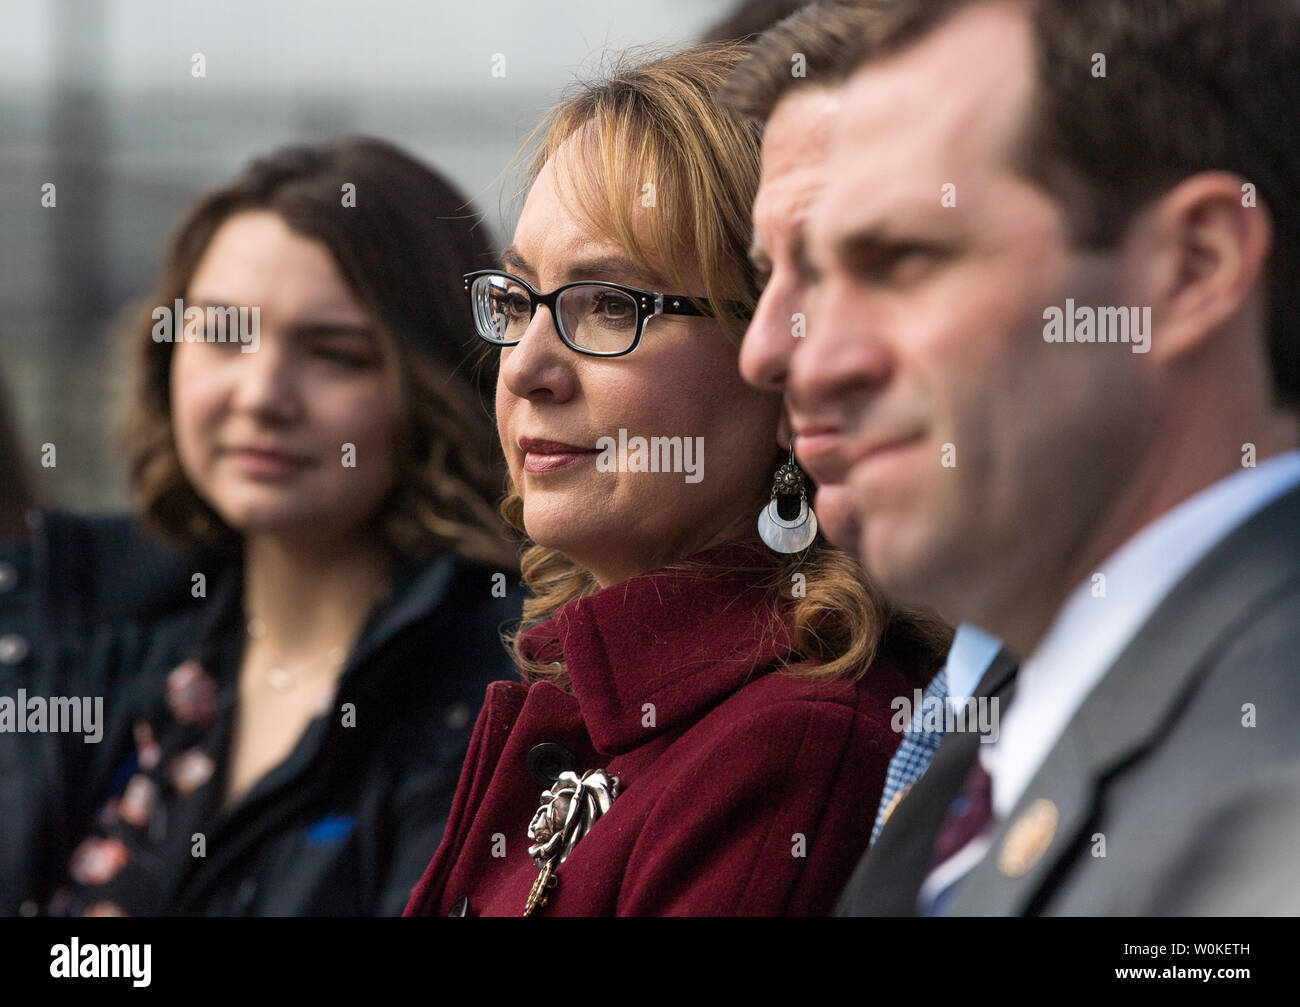 Former Rep. Gabrielle Giffords, D-Ariz., attends a news conference on H.R.8, the Bipartisan Background Checks Act of 2019, on Capitol Hill in Washington, D.C. on February 26, 2019. The bill mandates background checks for all firearm sales. Photo by Kevin Dietsch/UPI Stock Photo